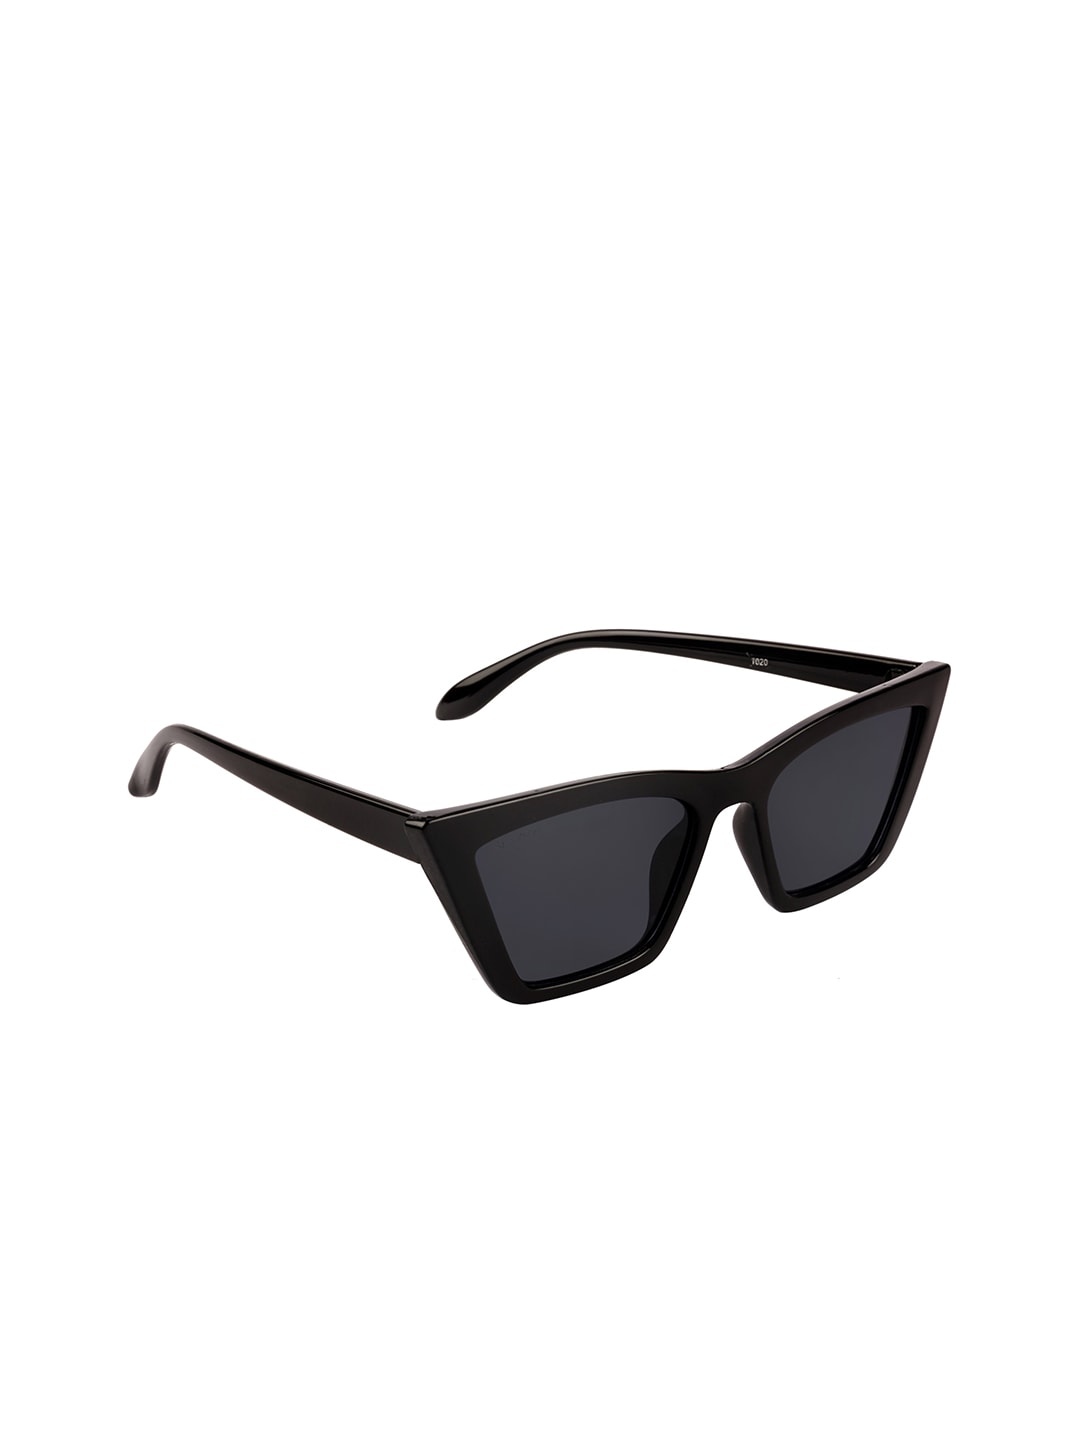 NuVew Women Black Lens & Black Cateye Sunglasses with UV Protected Lens Price in India